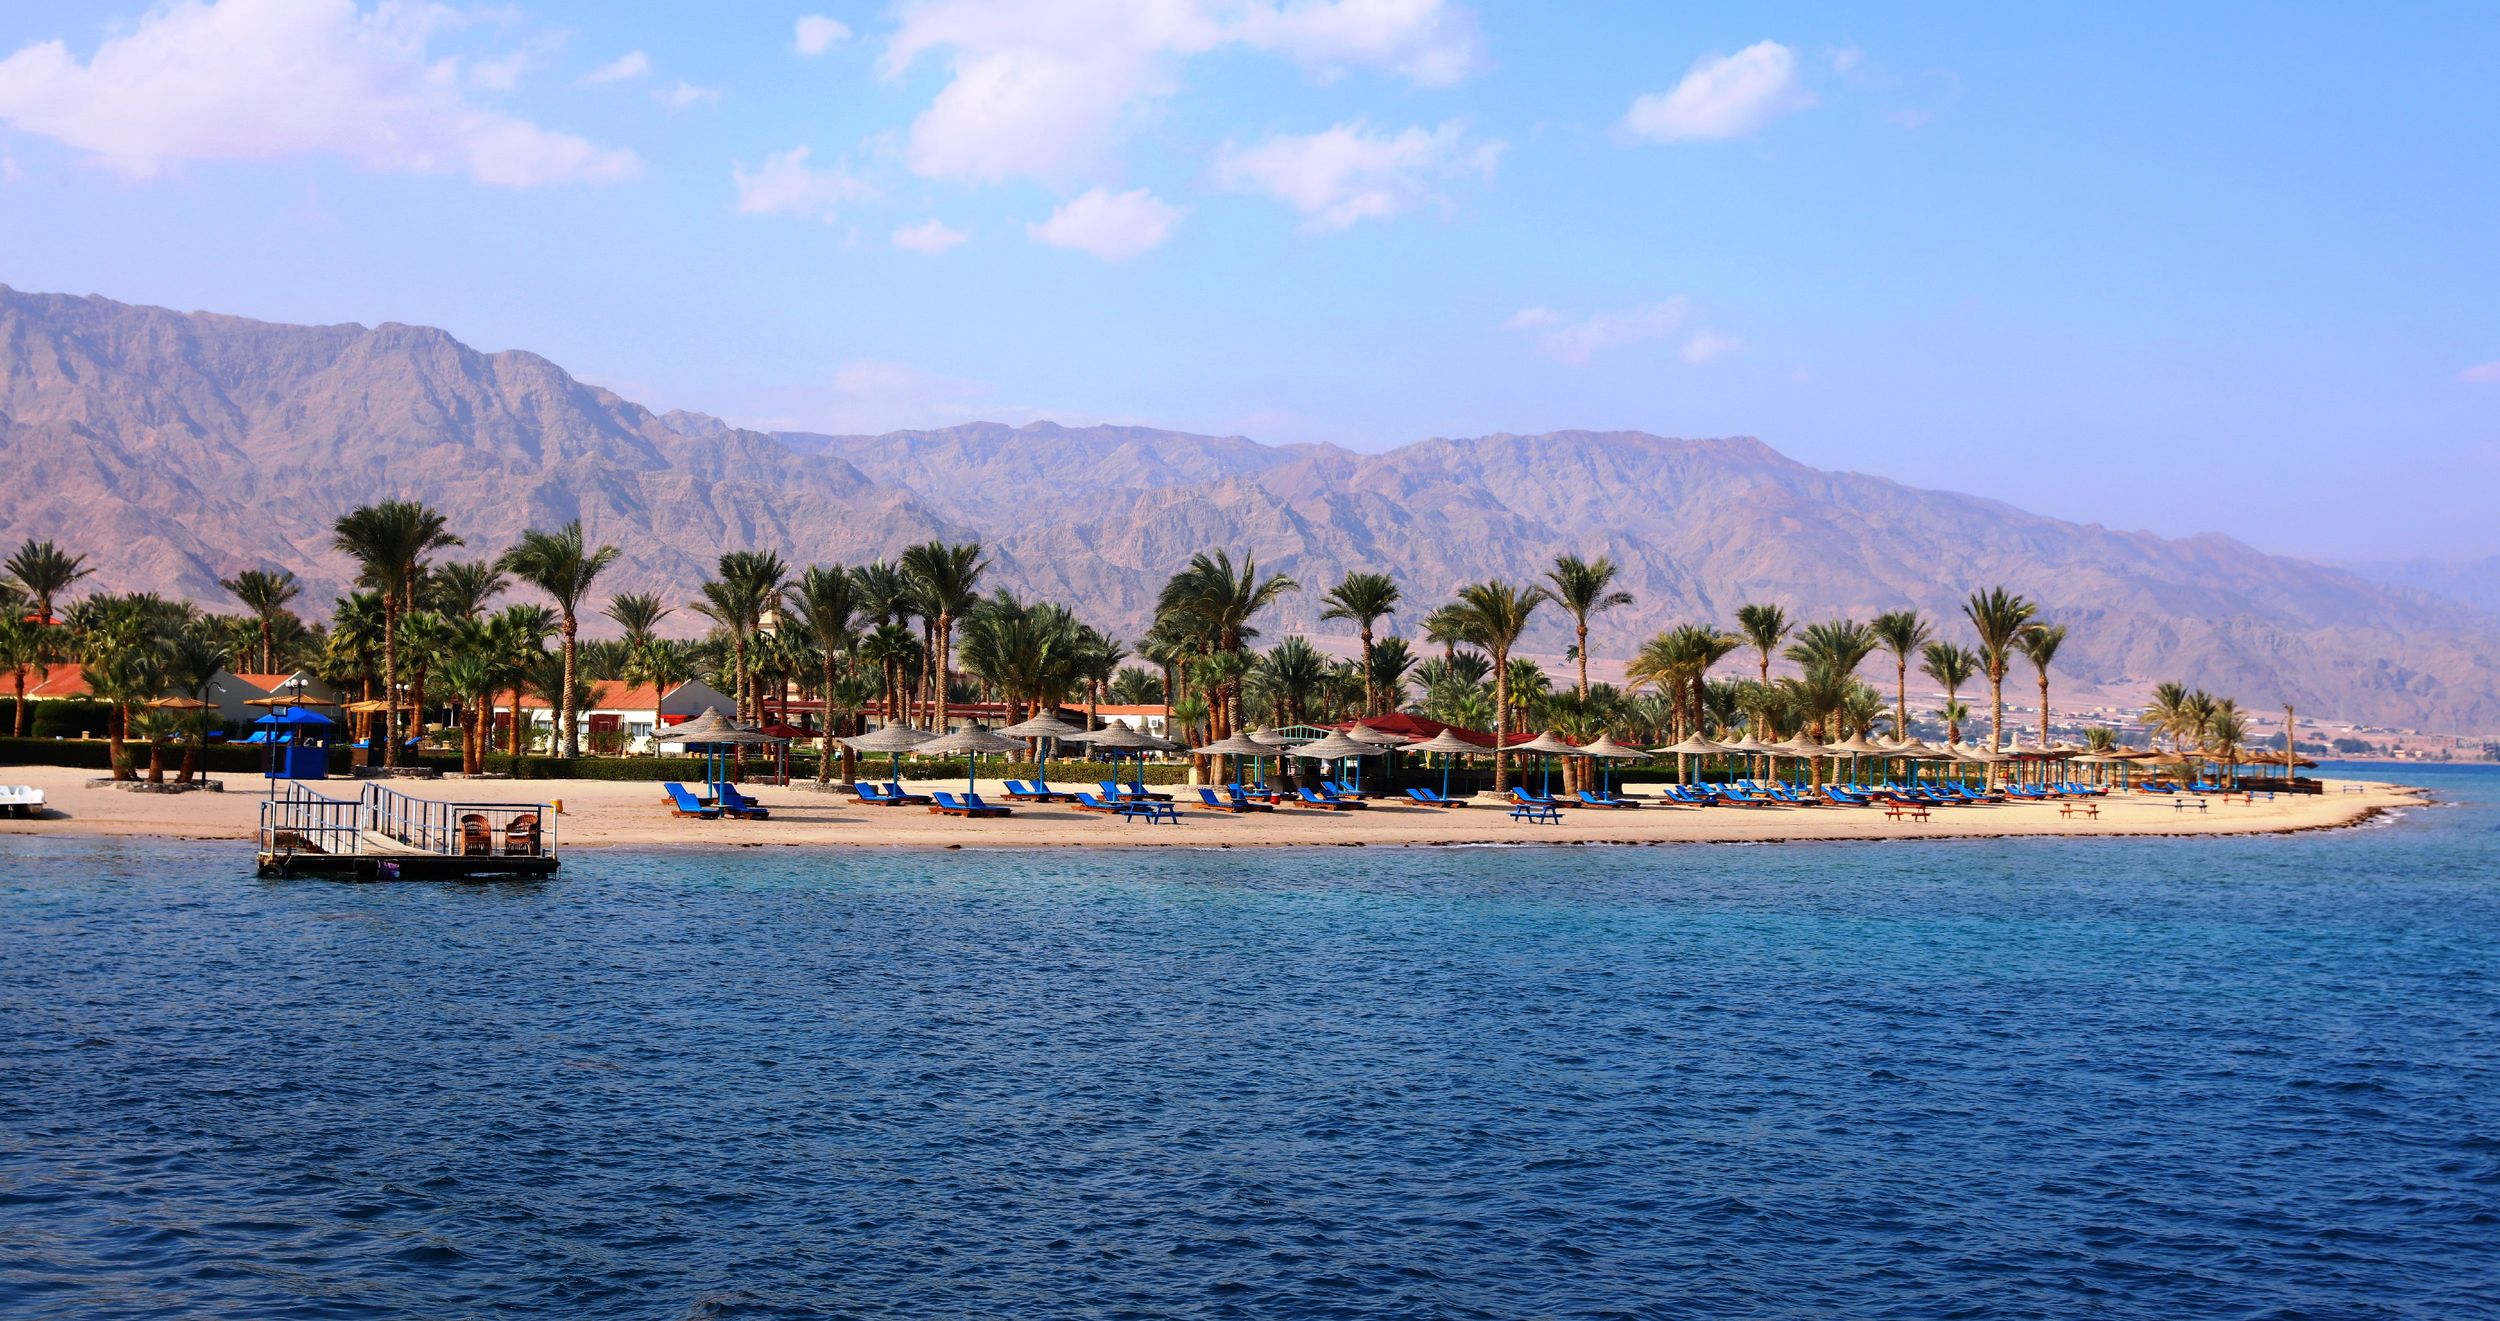 Nuweiba Club Resort – Check into another world